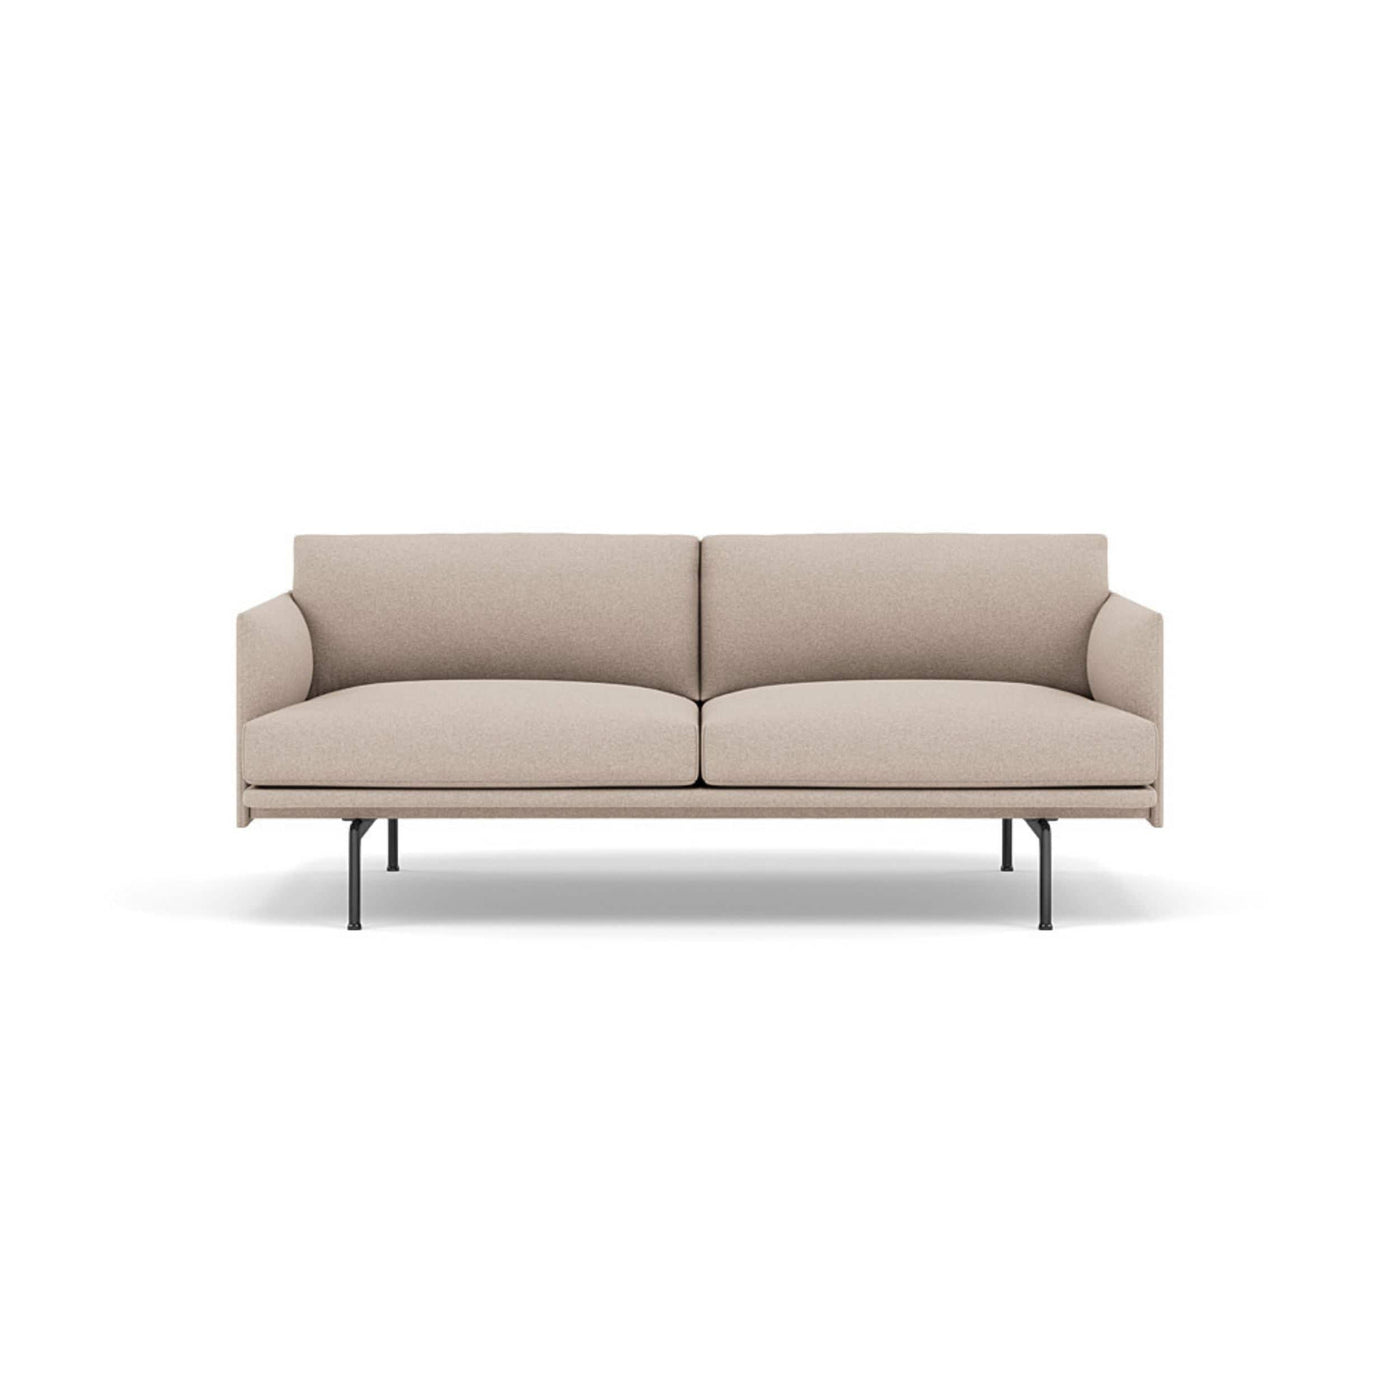 Muuto outline 2 seater sofa in divina md 213 natural fabric and black legs. Made to order from someday designs. #colour_divina-md-213-natural